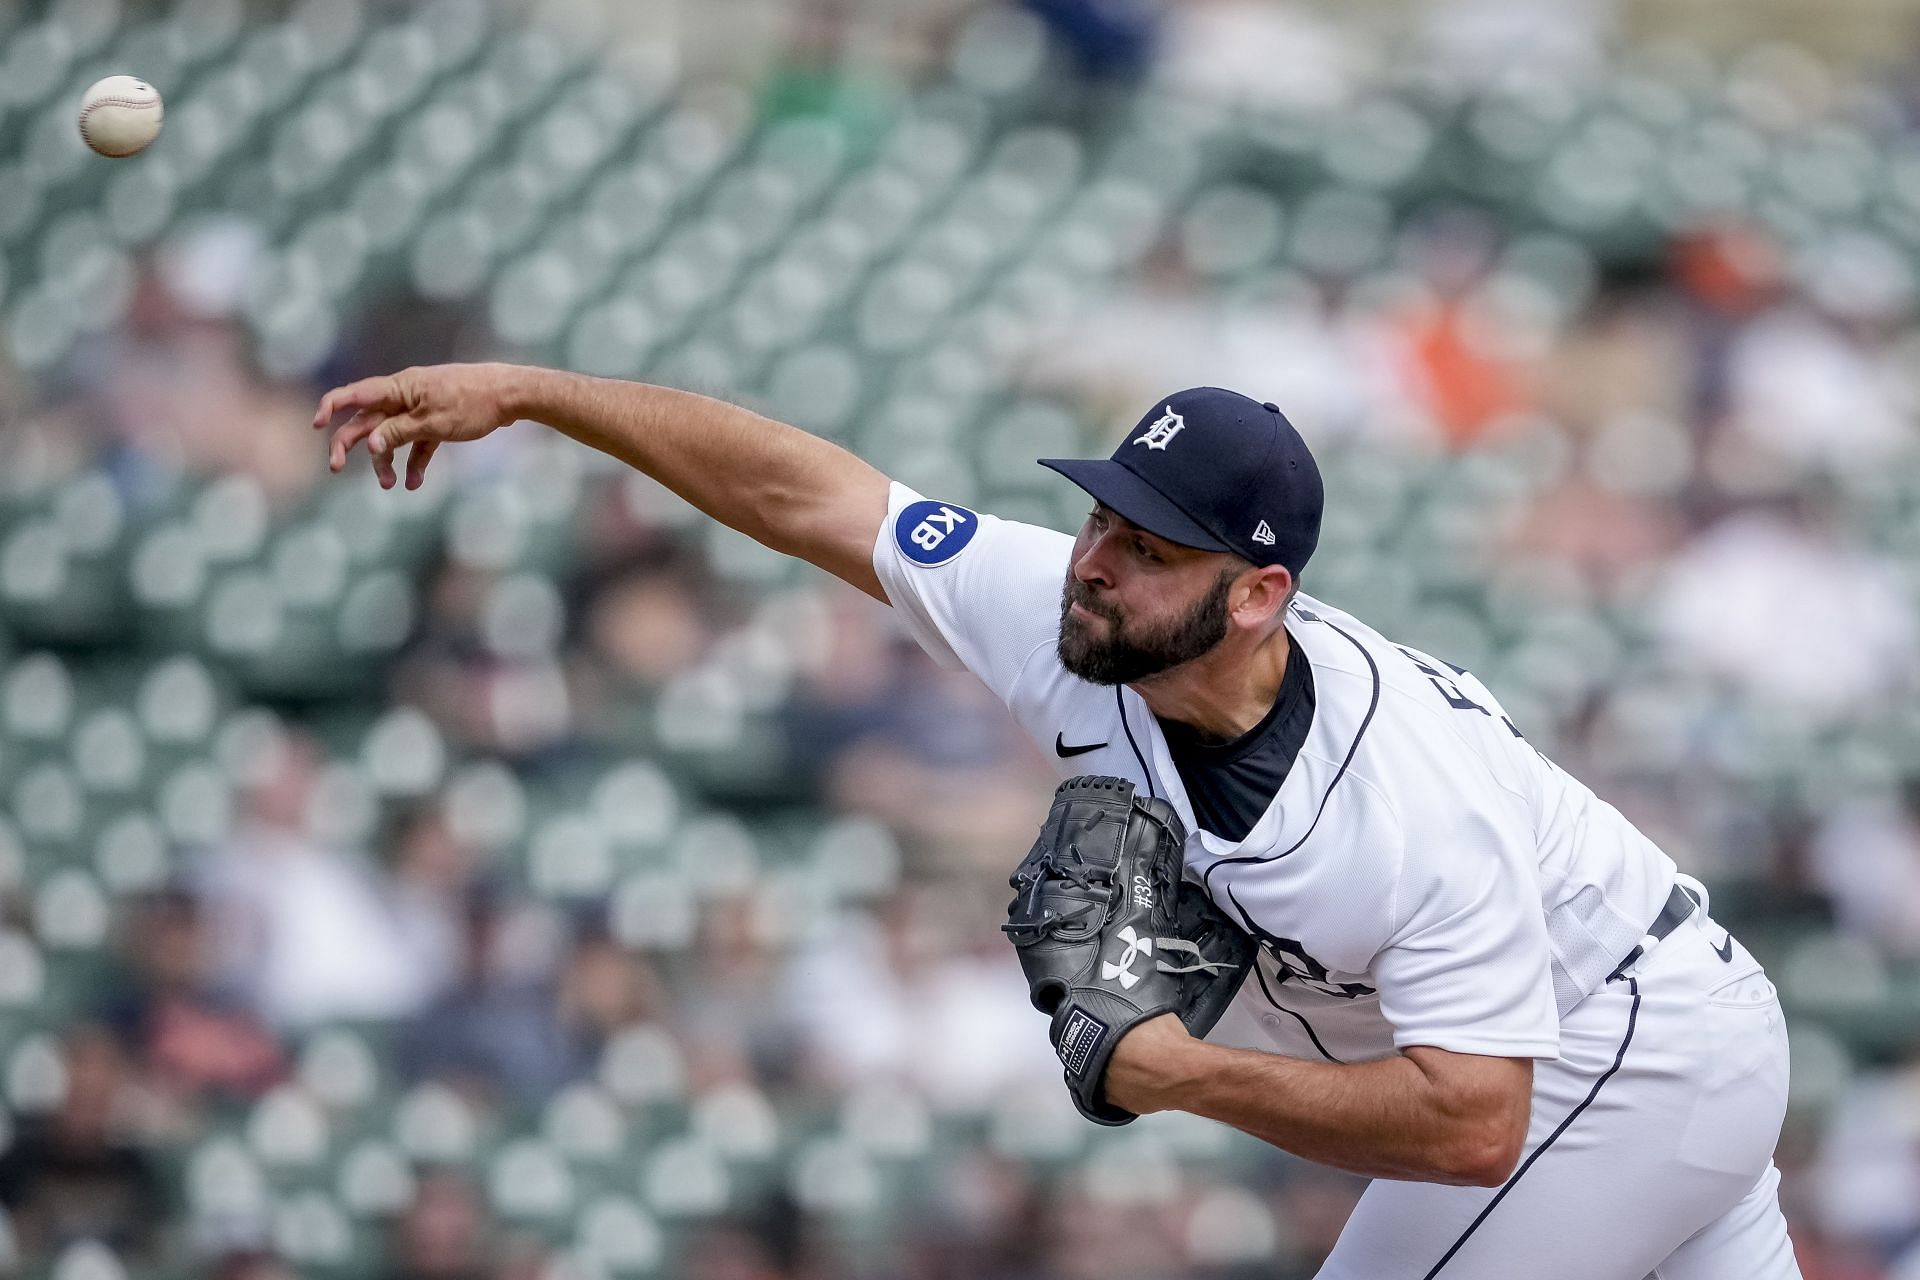 Makes me want to retire': Michael Fulmer in disbelief over Twins